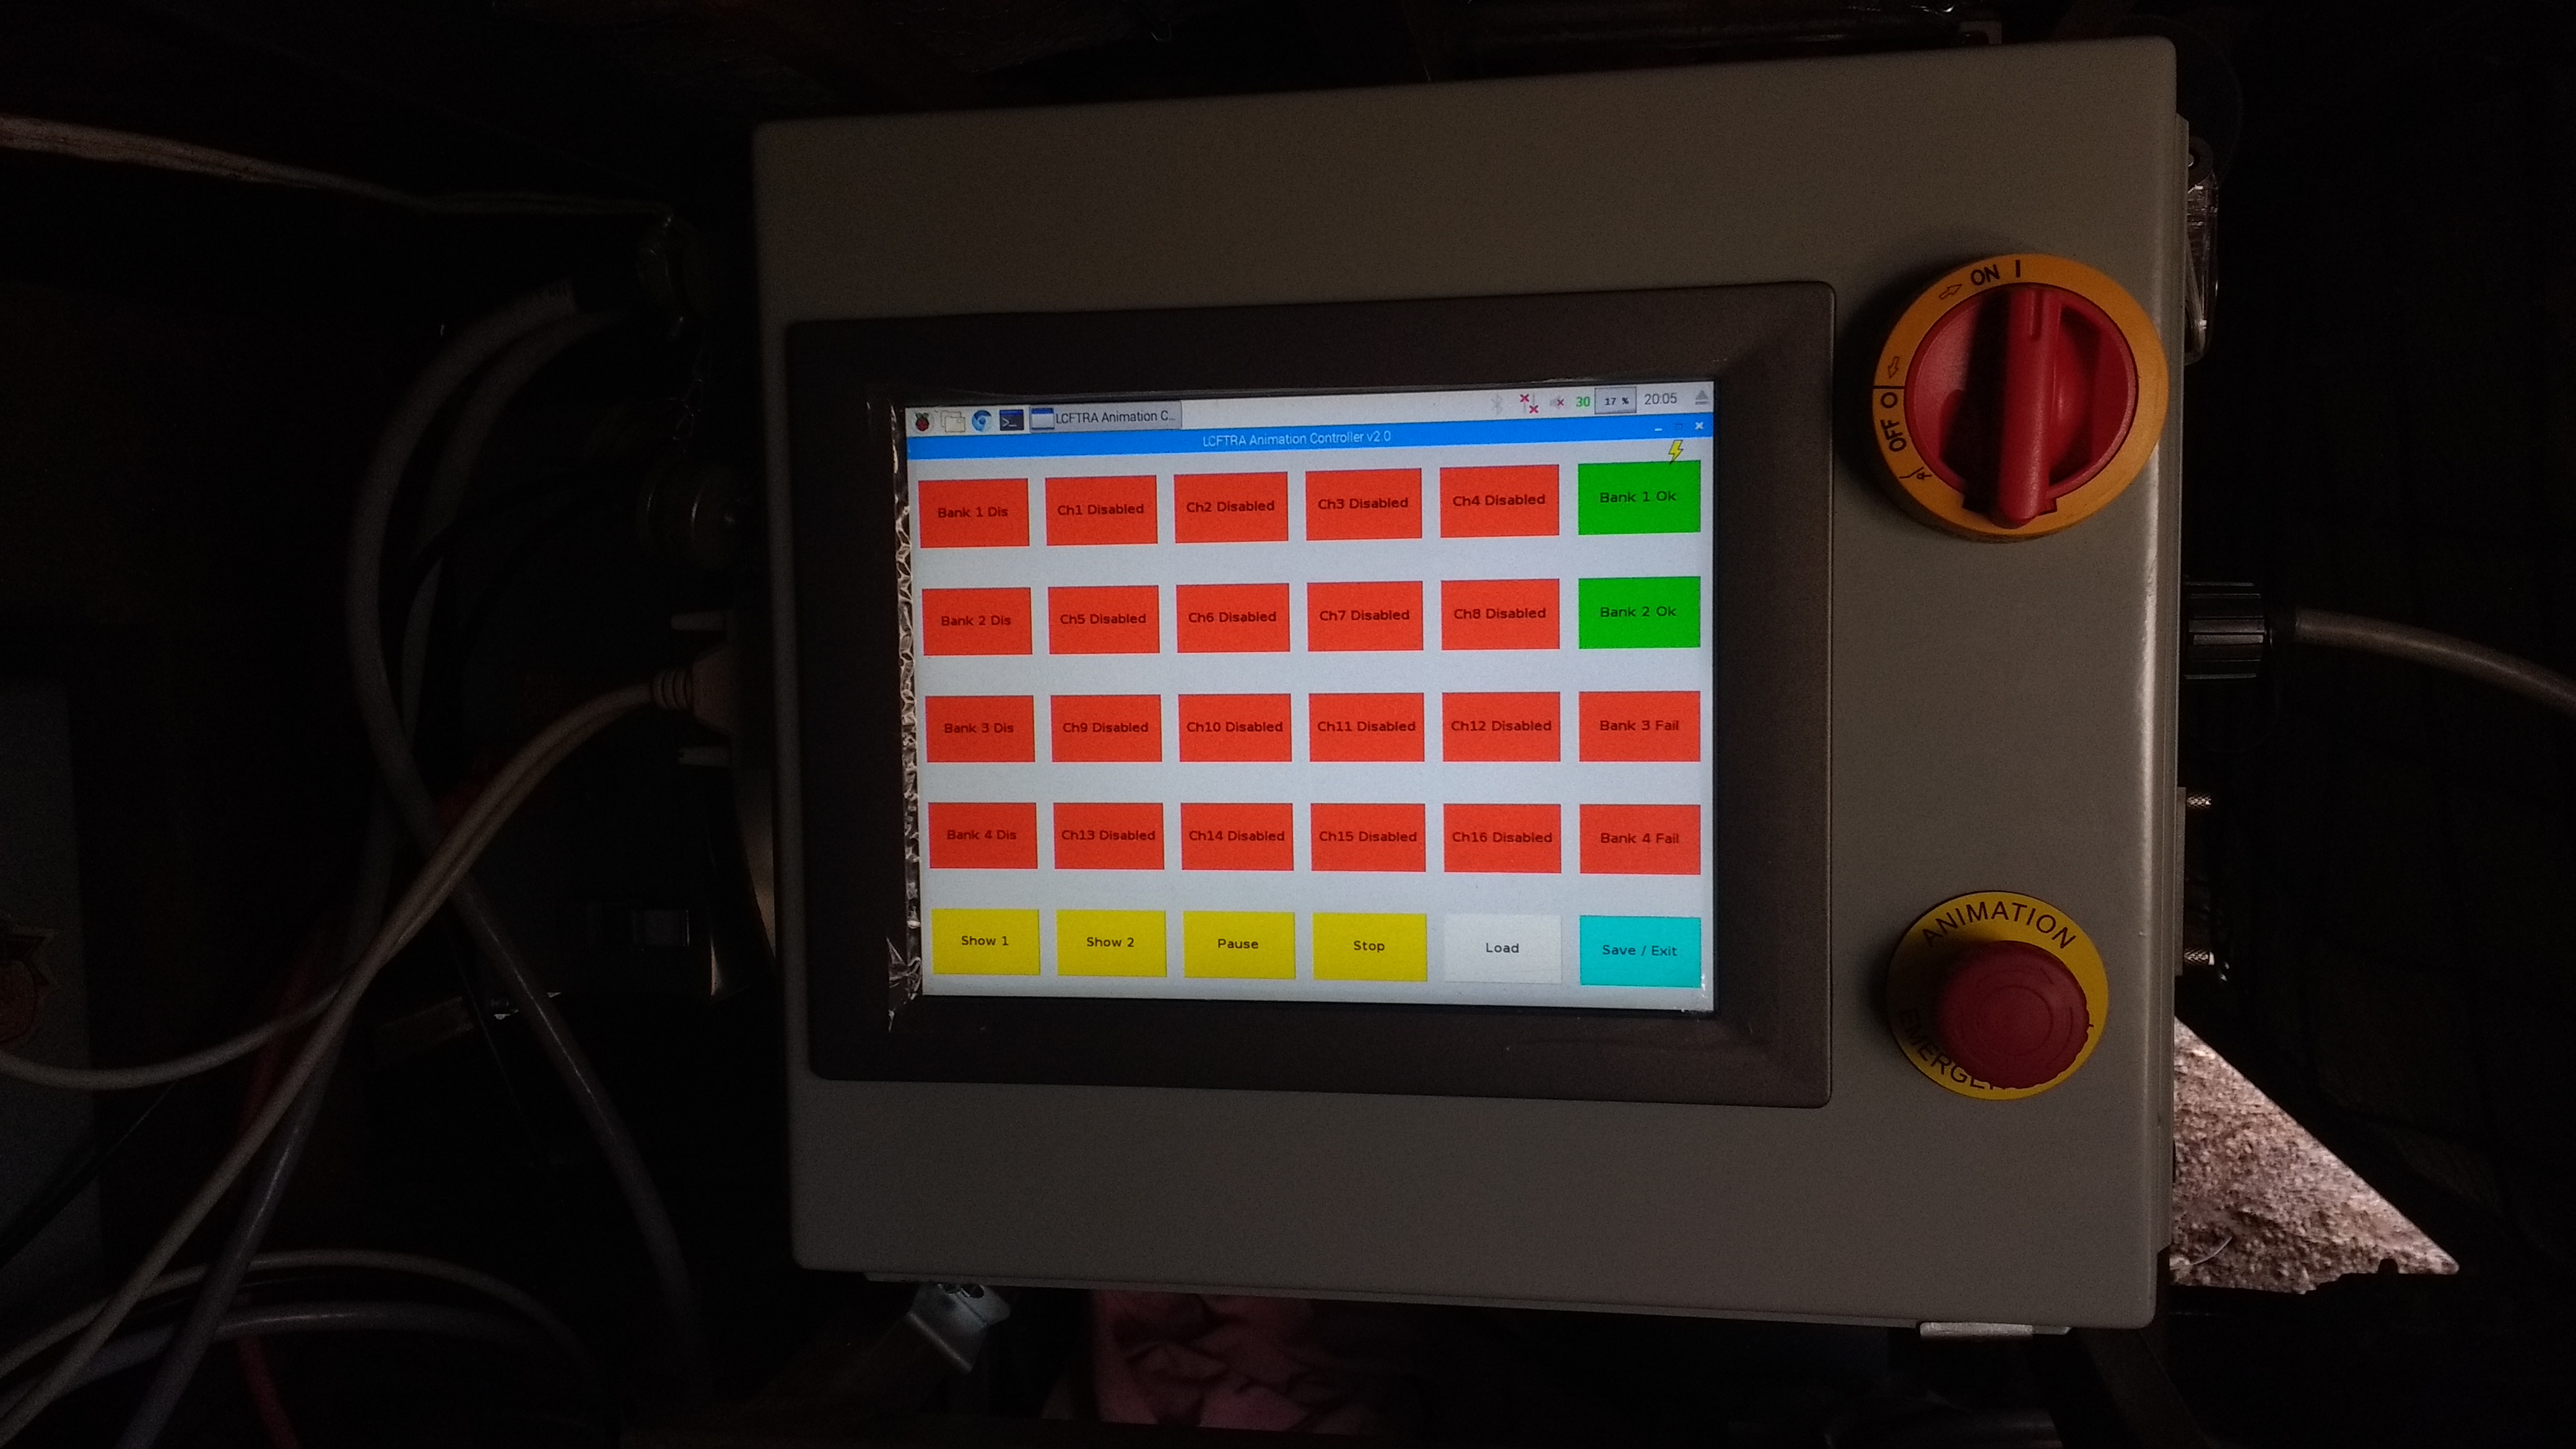 The installed main controller in the animator's compartment